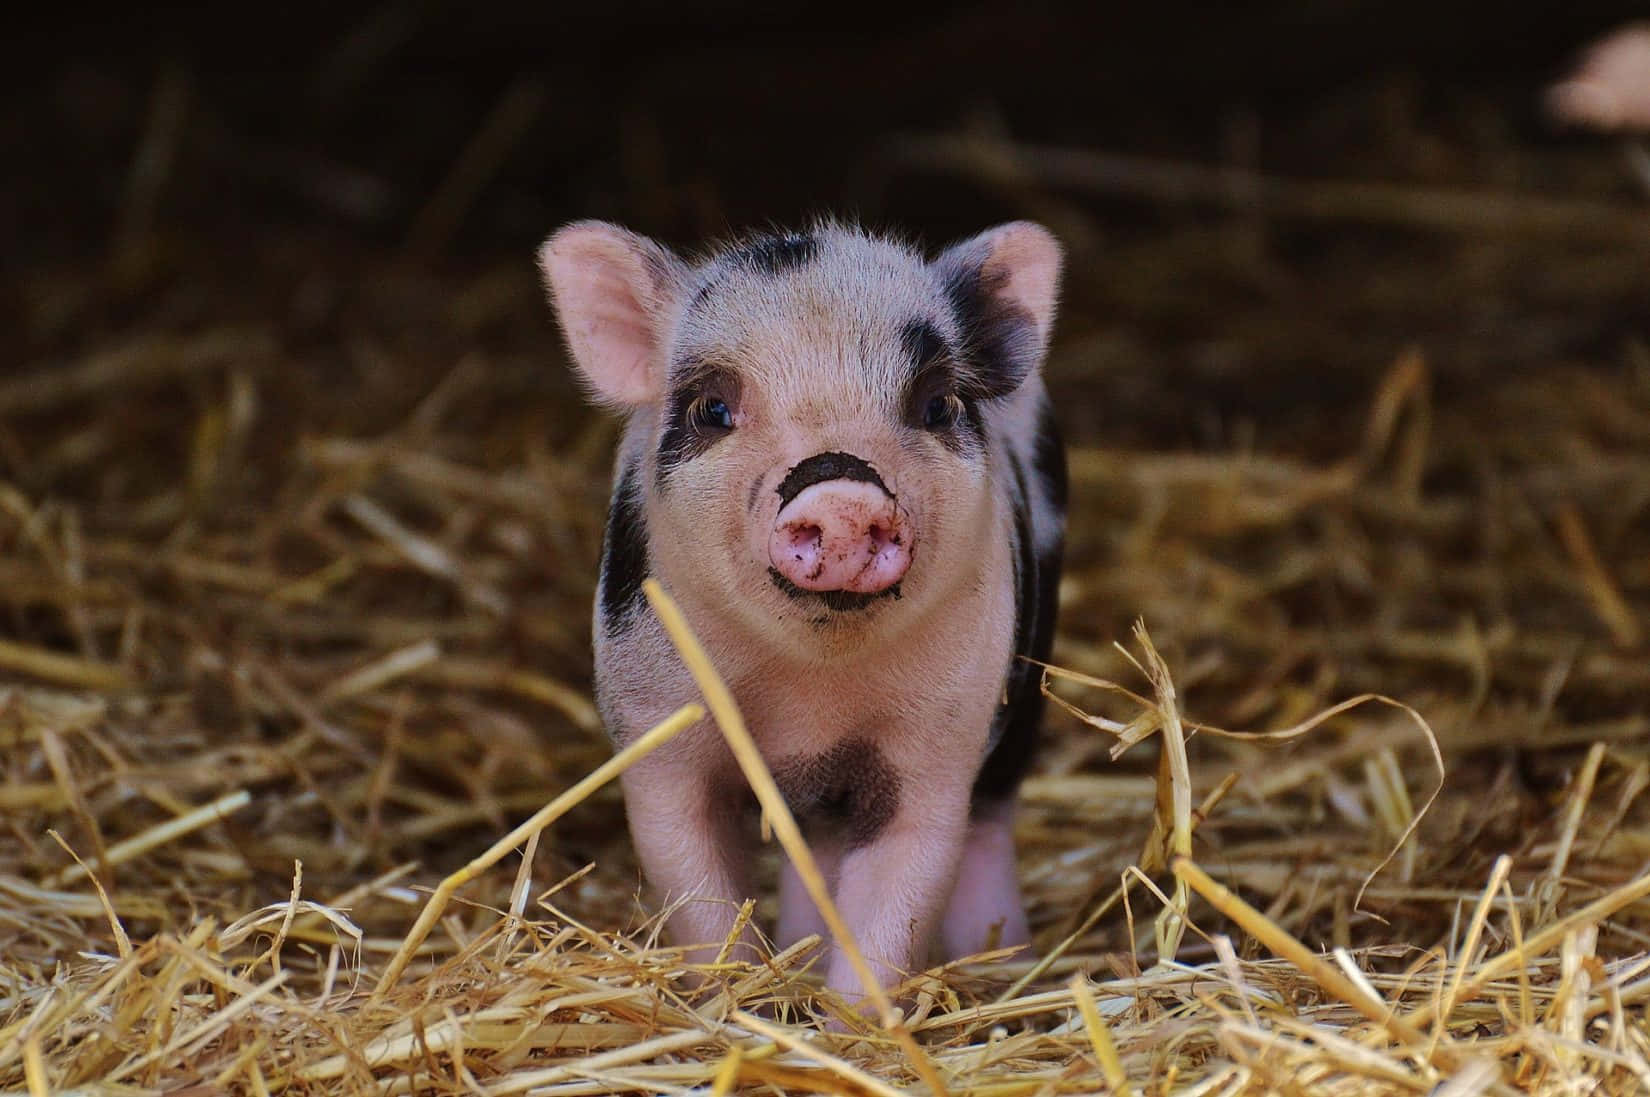 This Cute Pig's Smile Will Brighten Your Day!